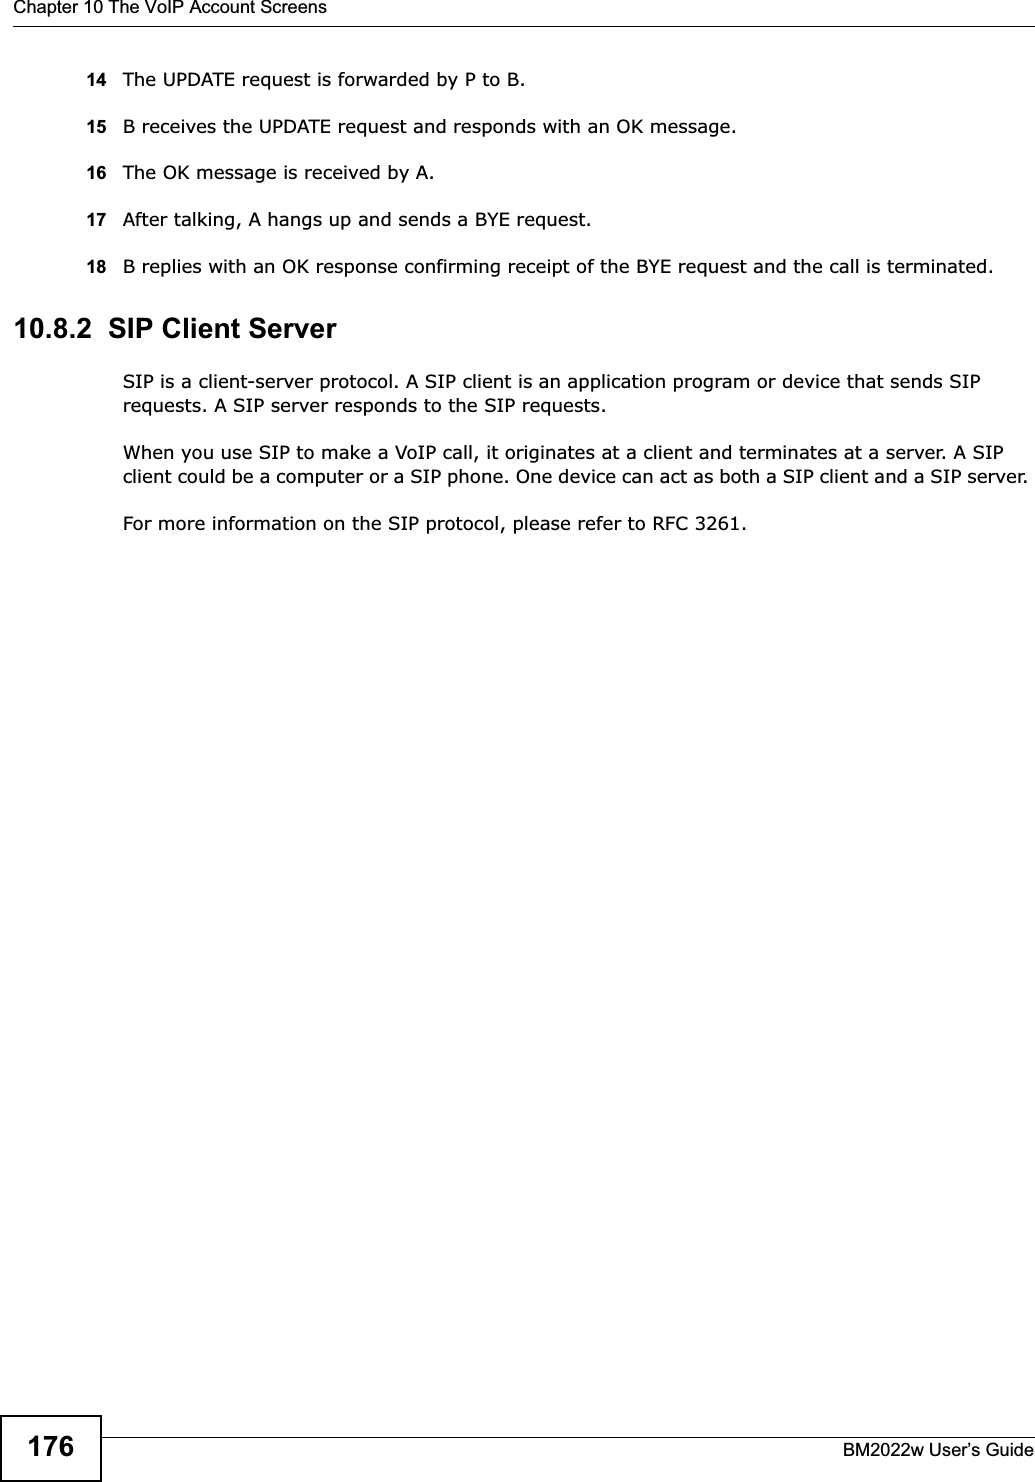 Chapter 10 The VoIP Account ScreensBM2022w User’s Guide17614 The UPDATE request is forwarded by P to B.15 B receives the UPDATE request and responds with an OK message.16 The OK message is received by A.17 After talking, A hangs up and sends a BYE request. 18 B replies with an OK response confirming receipt of the BYE request and the call is terminated.10.8.2  SIP Client ServerSIP is a client-server protocol. A SIP client is an application program or device that sends SIP requests. A SIP server responds to the SIP requests. When you use SIP to make a VoIP call, it originates at a client and terminates at a server. A SIP client could be a computer or a SIP phone. One device can act as both a SIP client and a SIP server. For more information on the SIP protocol, please refer to RFC 3261.